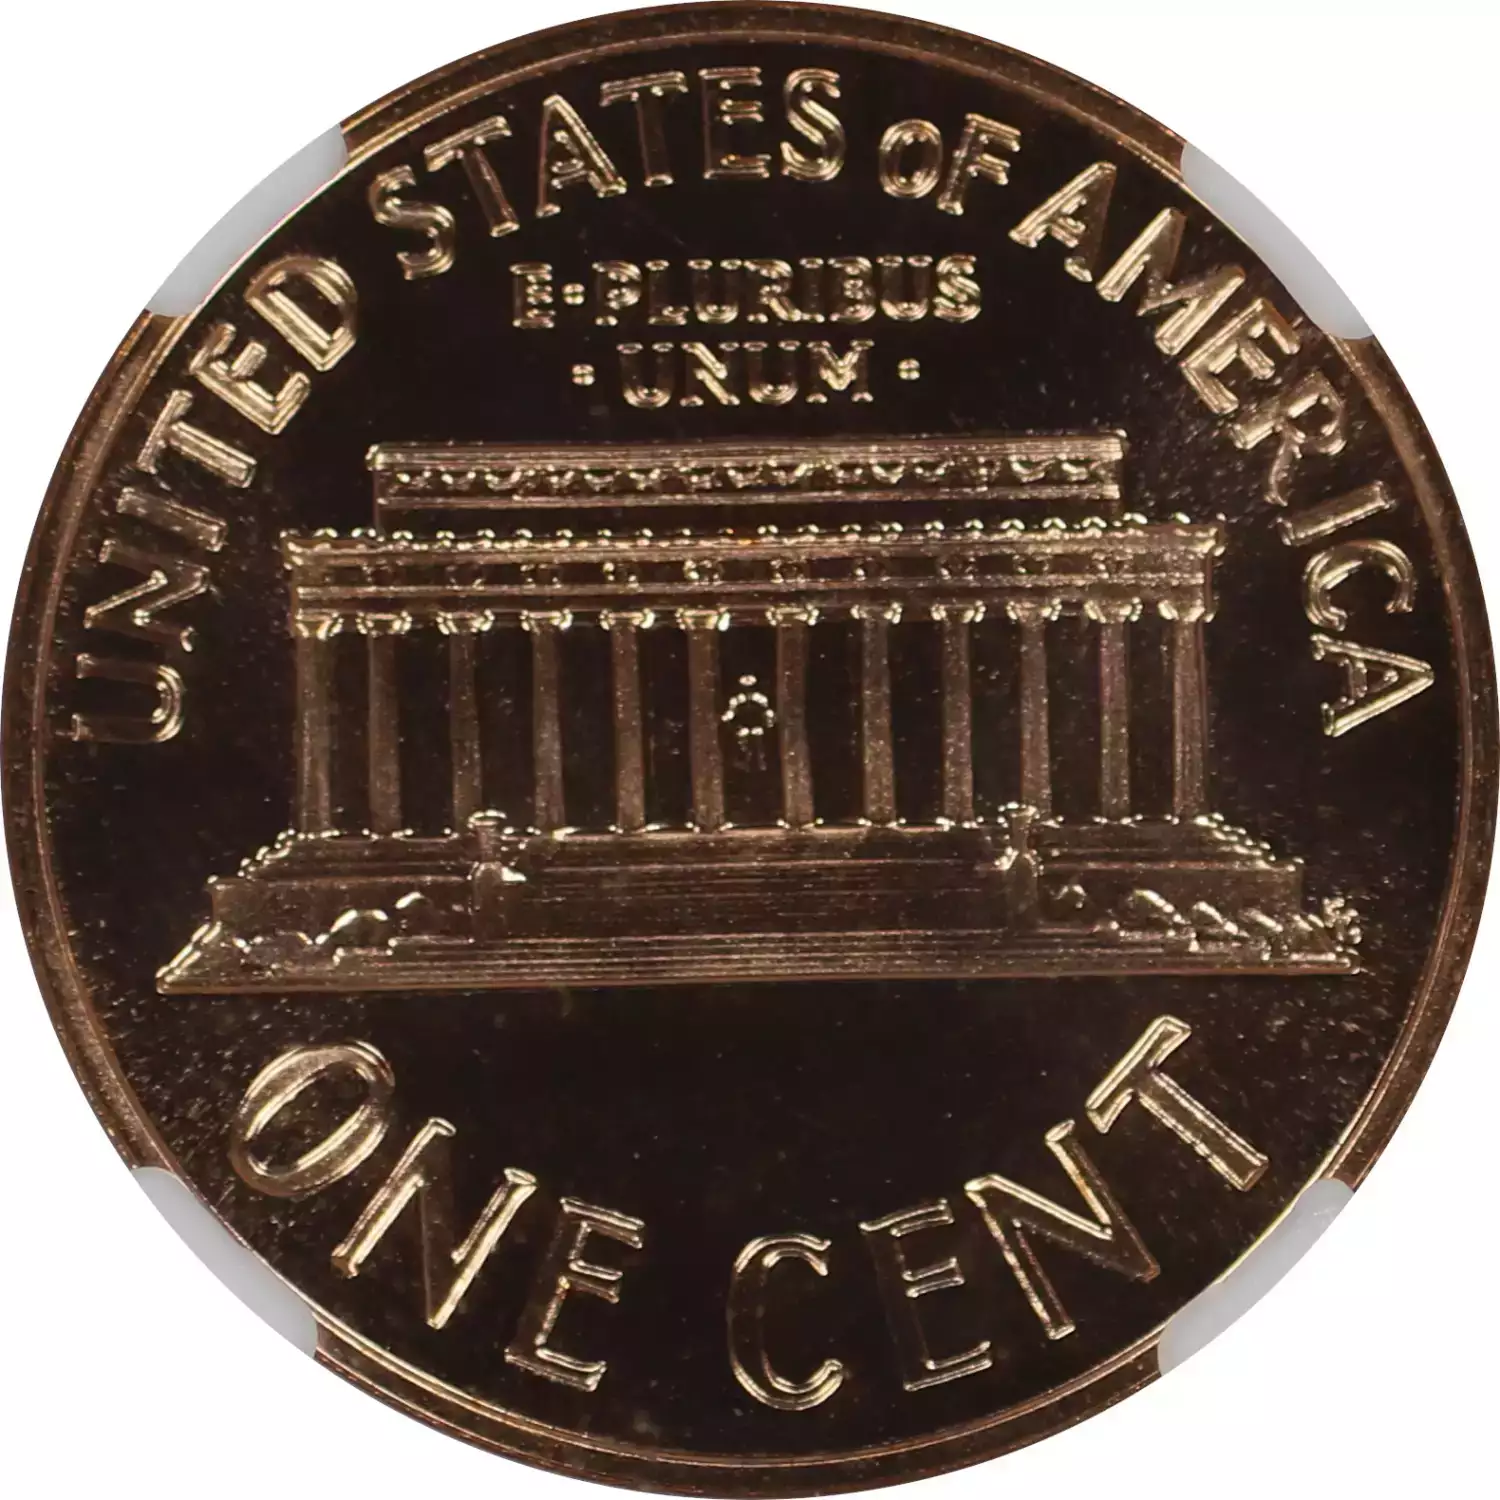 1964 PROOF LINCOLN MEMORIAL CENT PENNY 1C NGC CERTIFIED PF 67 RD (3)